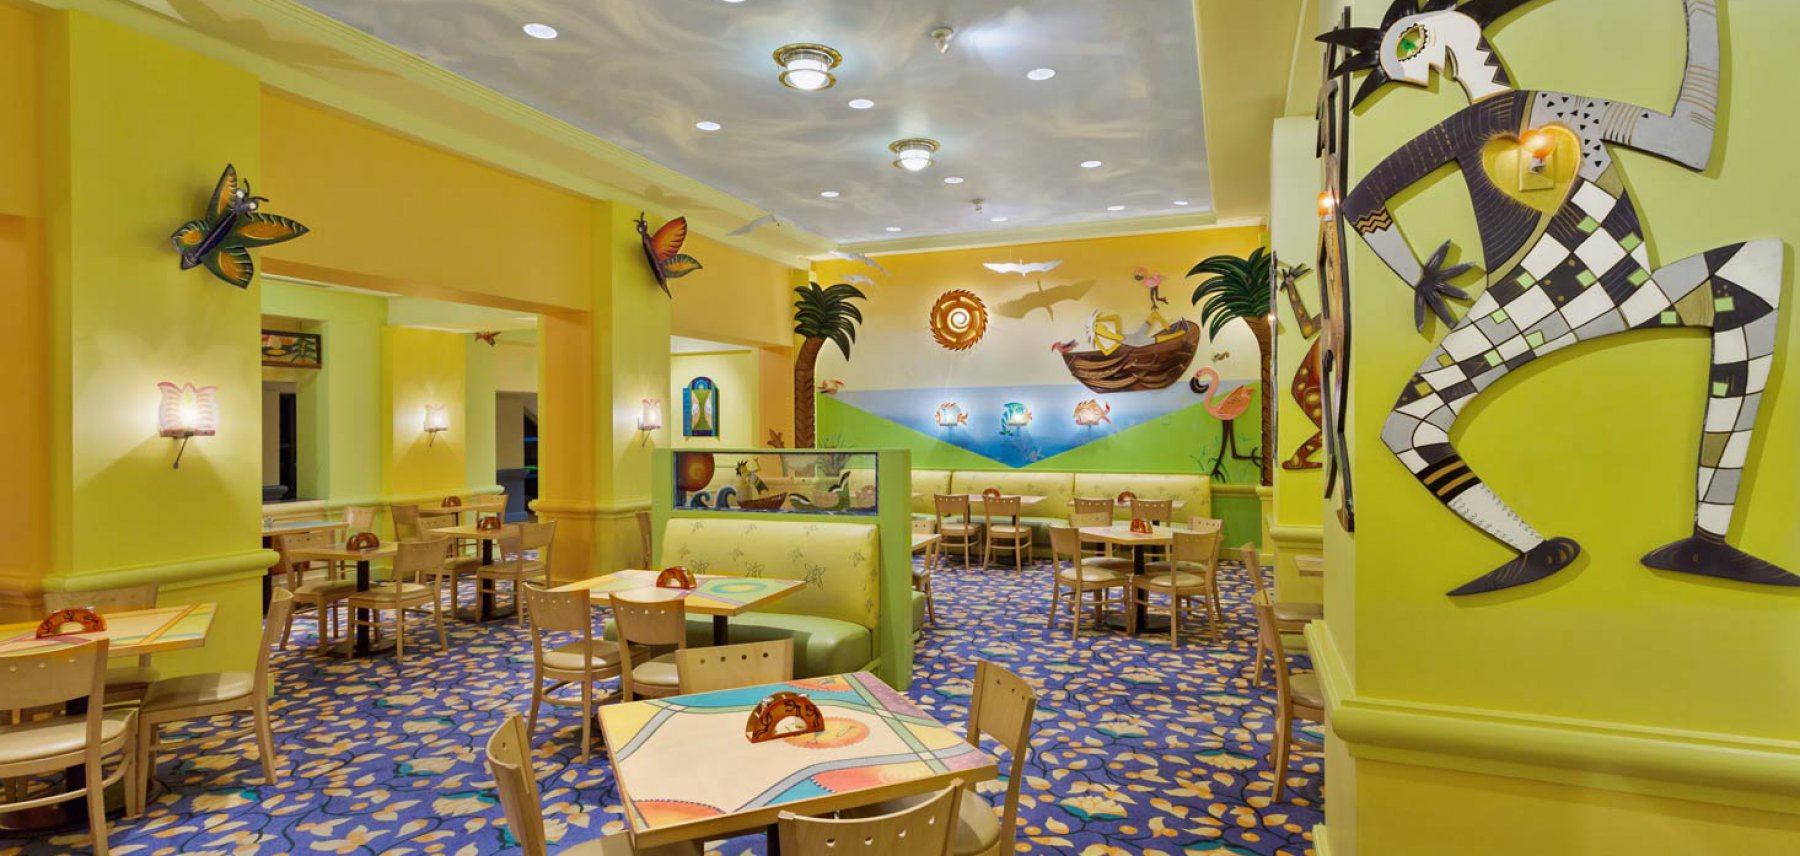 Dining Area with Chairs, Tables and Painted Animated Characters